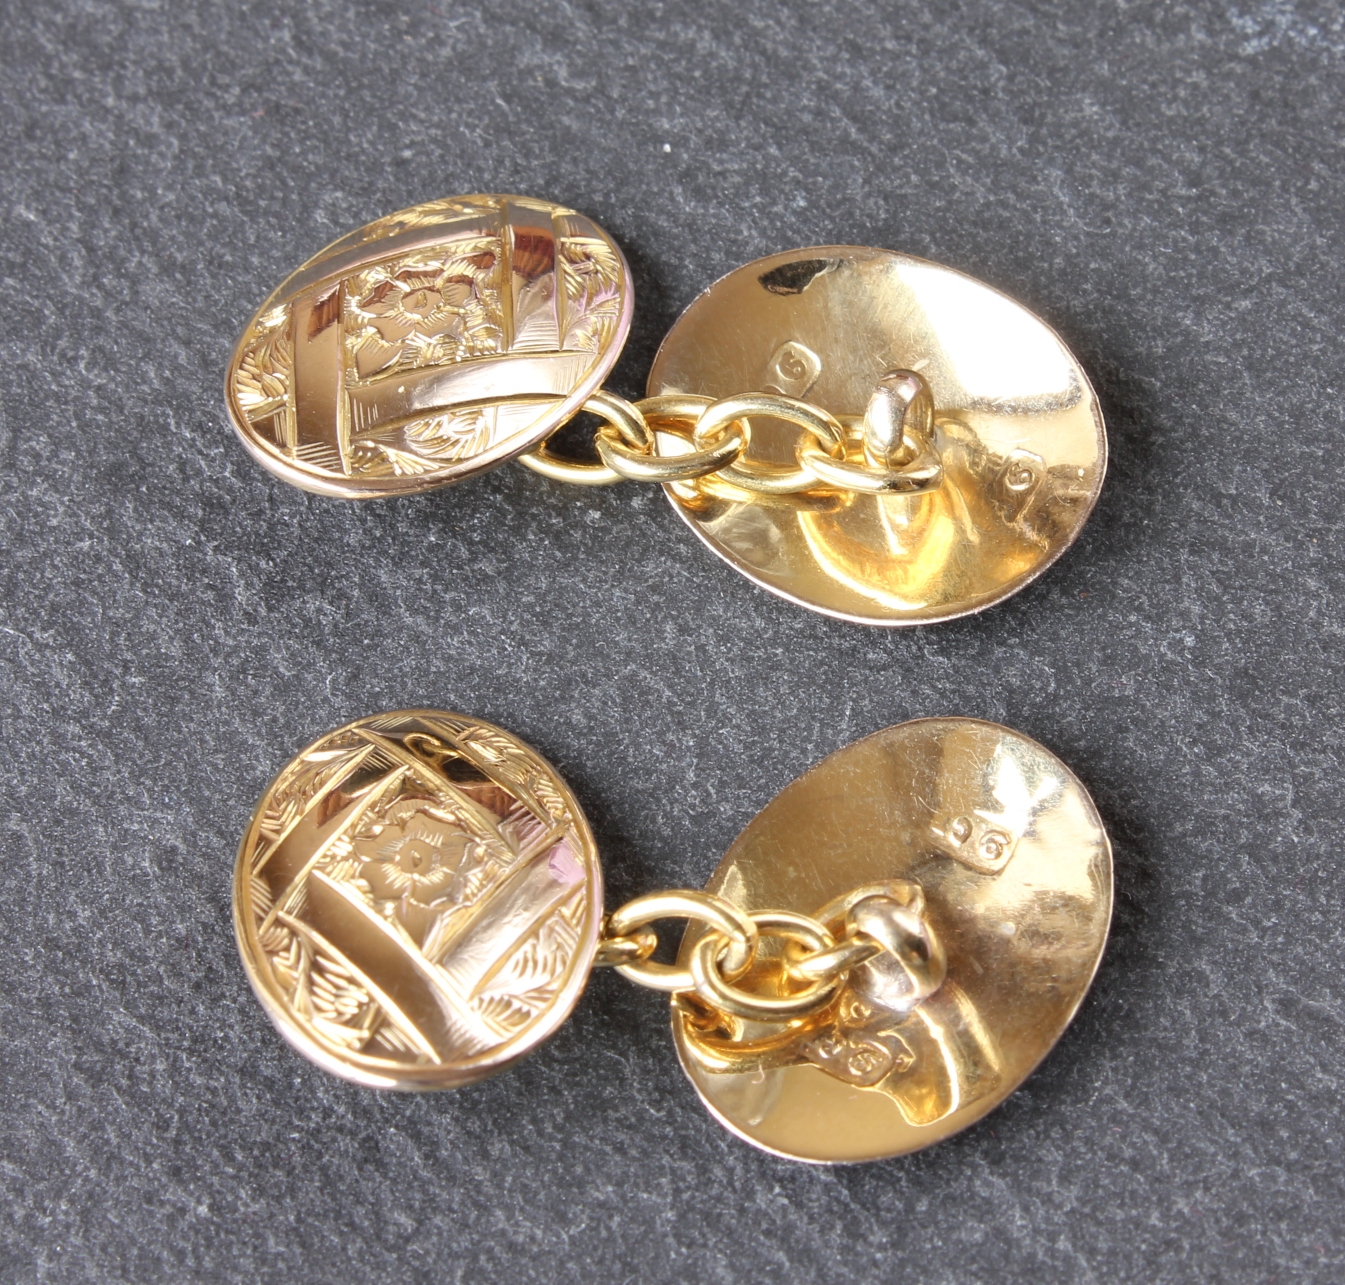 Vintage 9ct Gold Oval Floral Cufflinks in Gift Box. 1946.